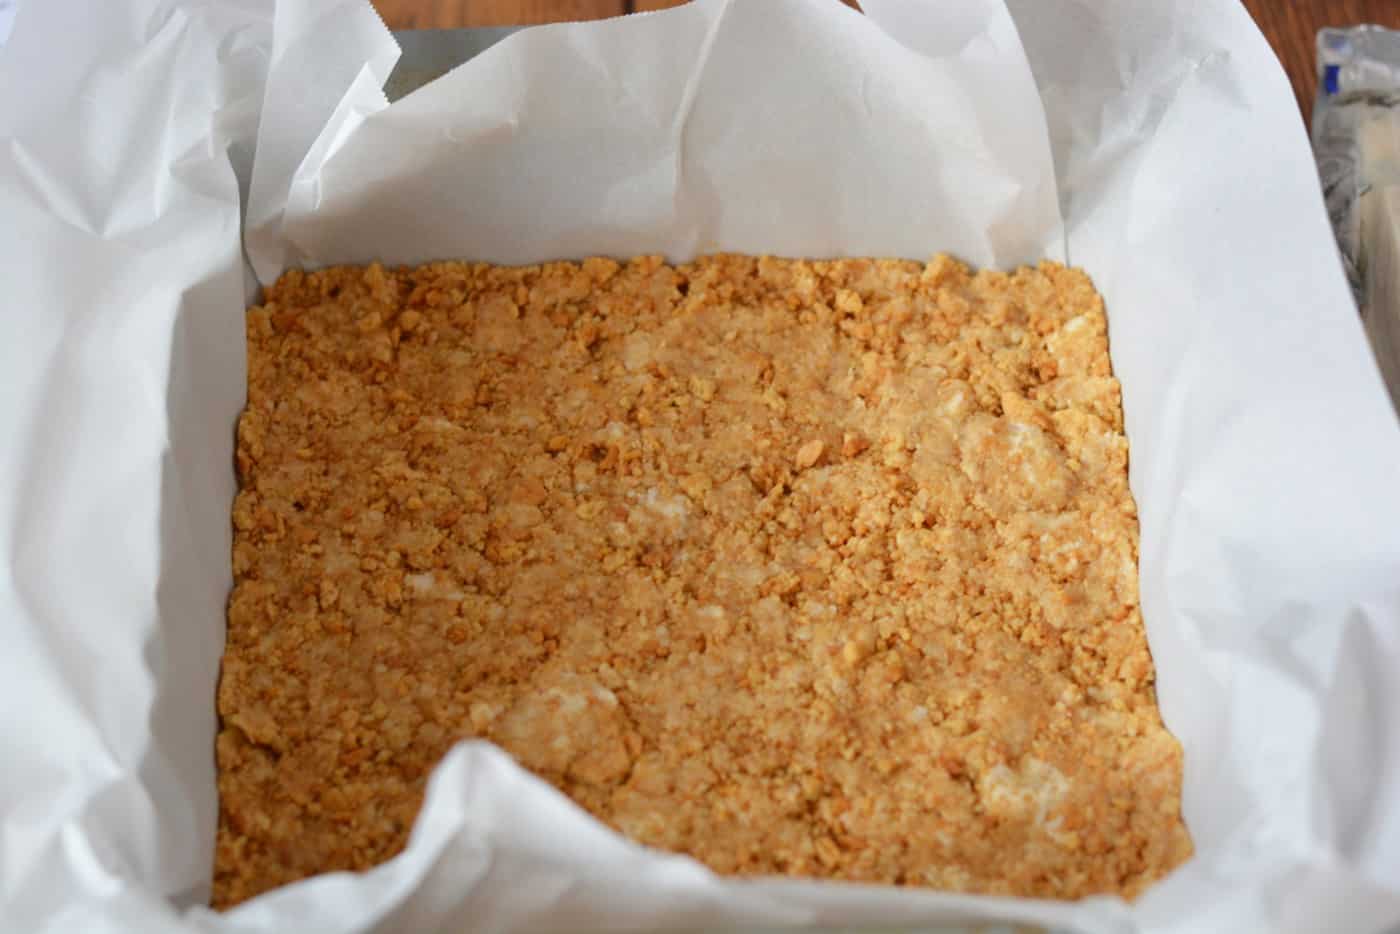 Crust pressed into the square pan lined with parchment paper